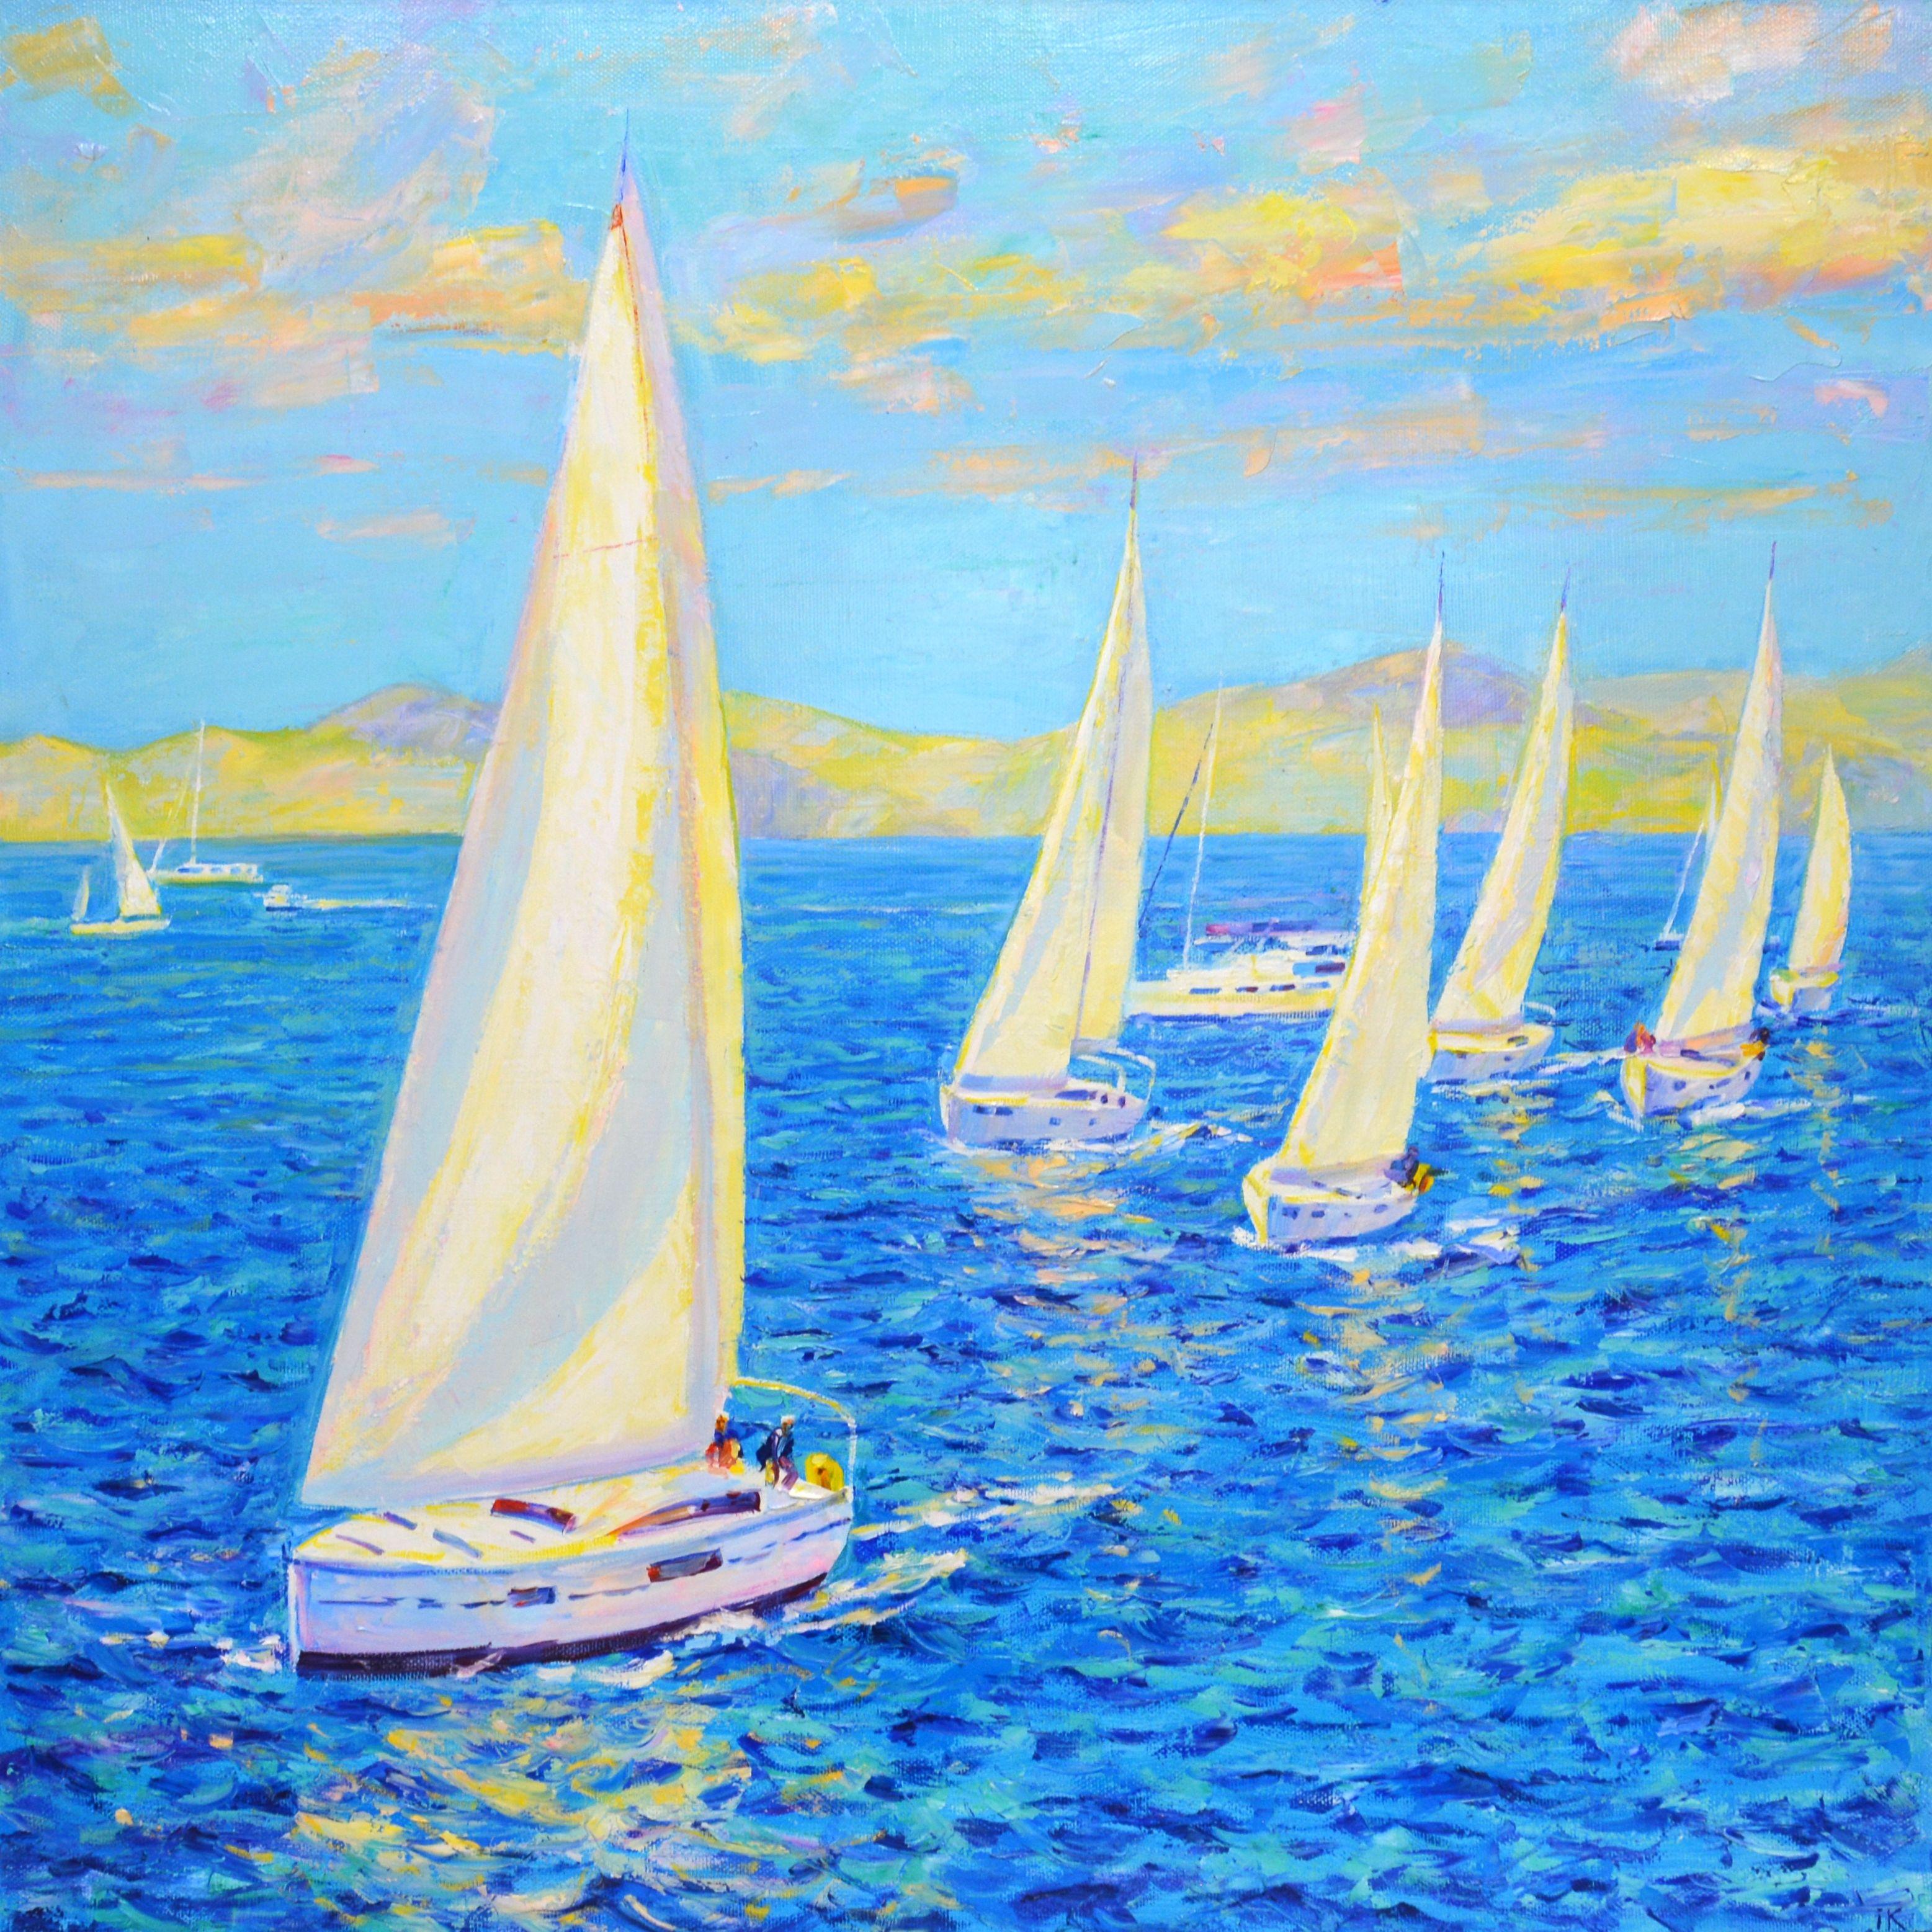 Sailing regatta. Sailboats sail under the midday sun, the light is reflected from the canvas of the sail and passing clouds, the ocean, a serene view, creates an atmosphere of relaxation, harmony and bliss. Realism. The work of the palette knife